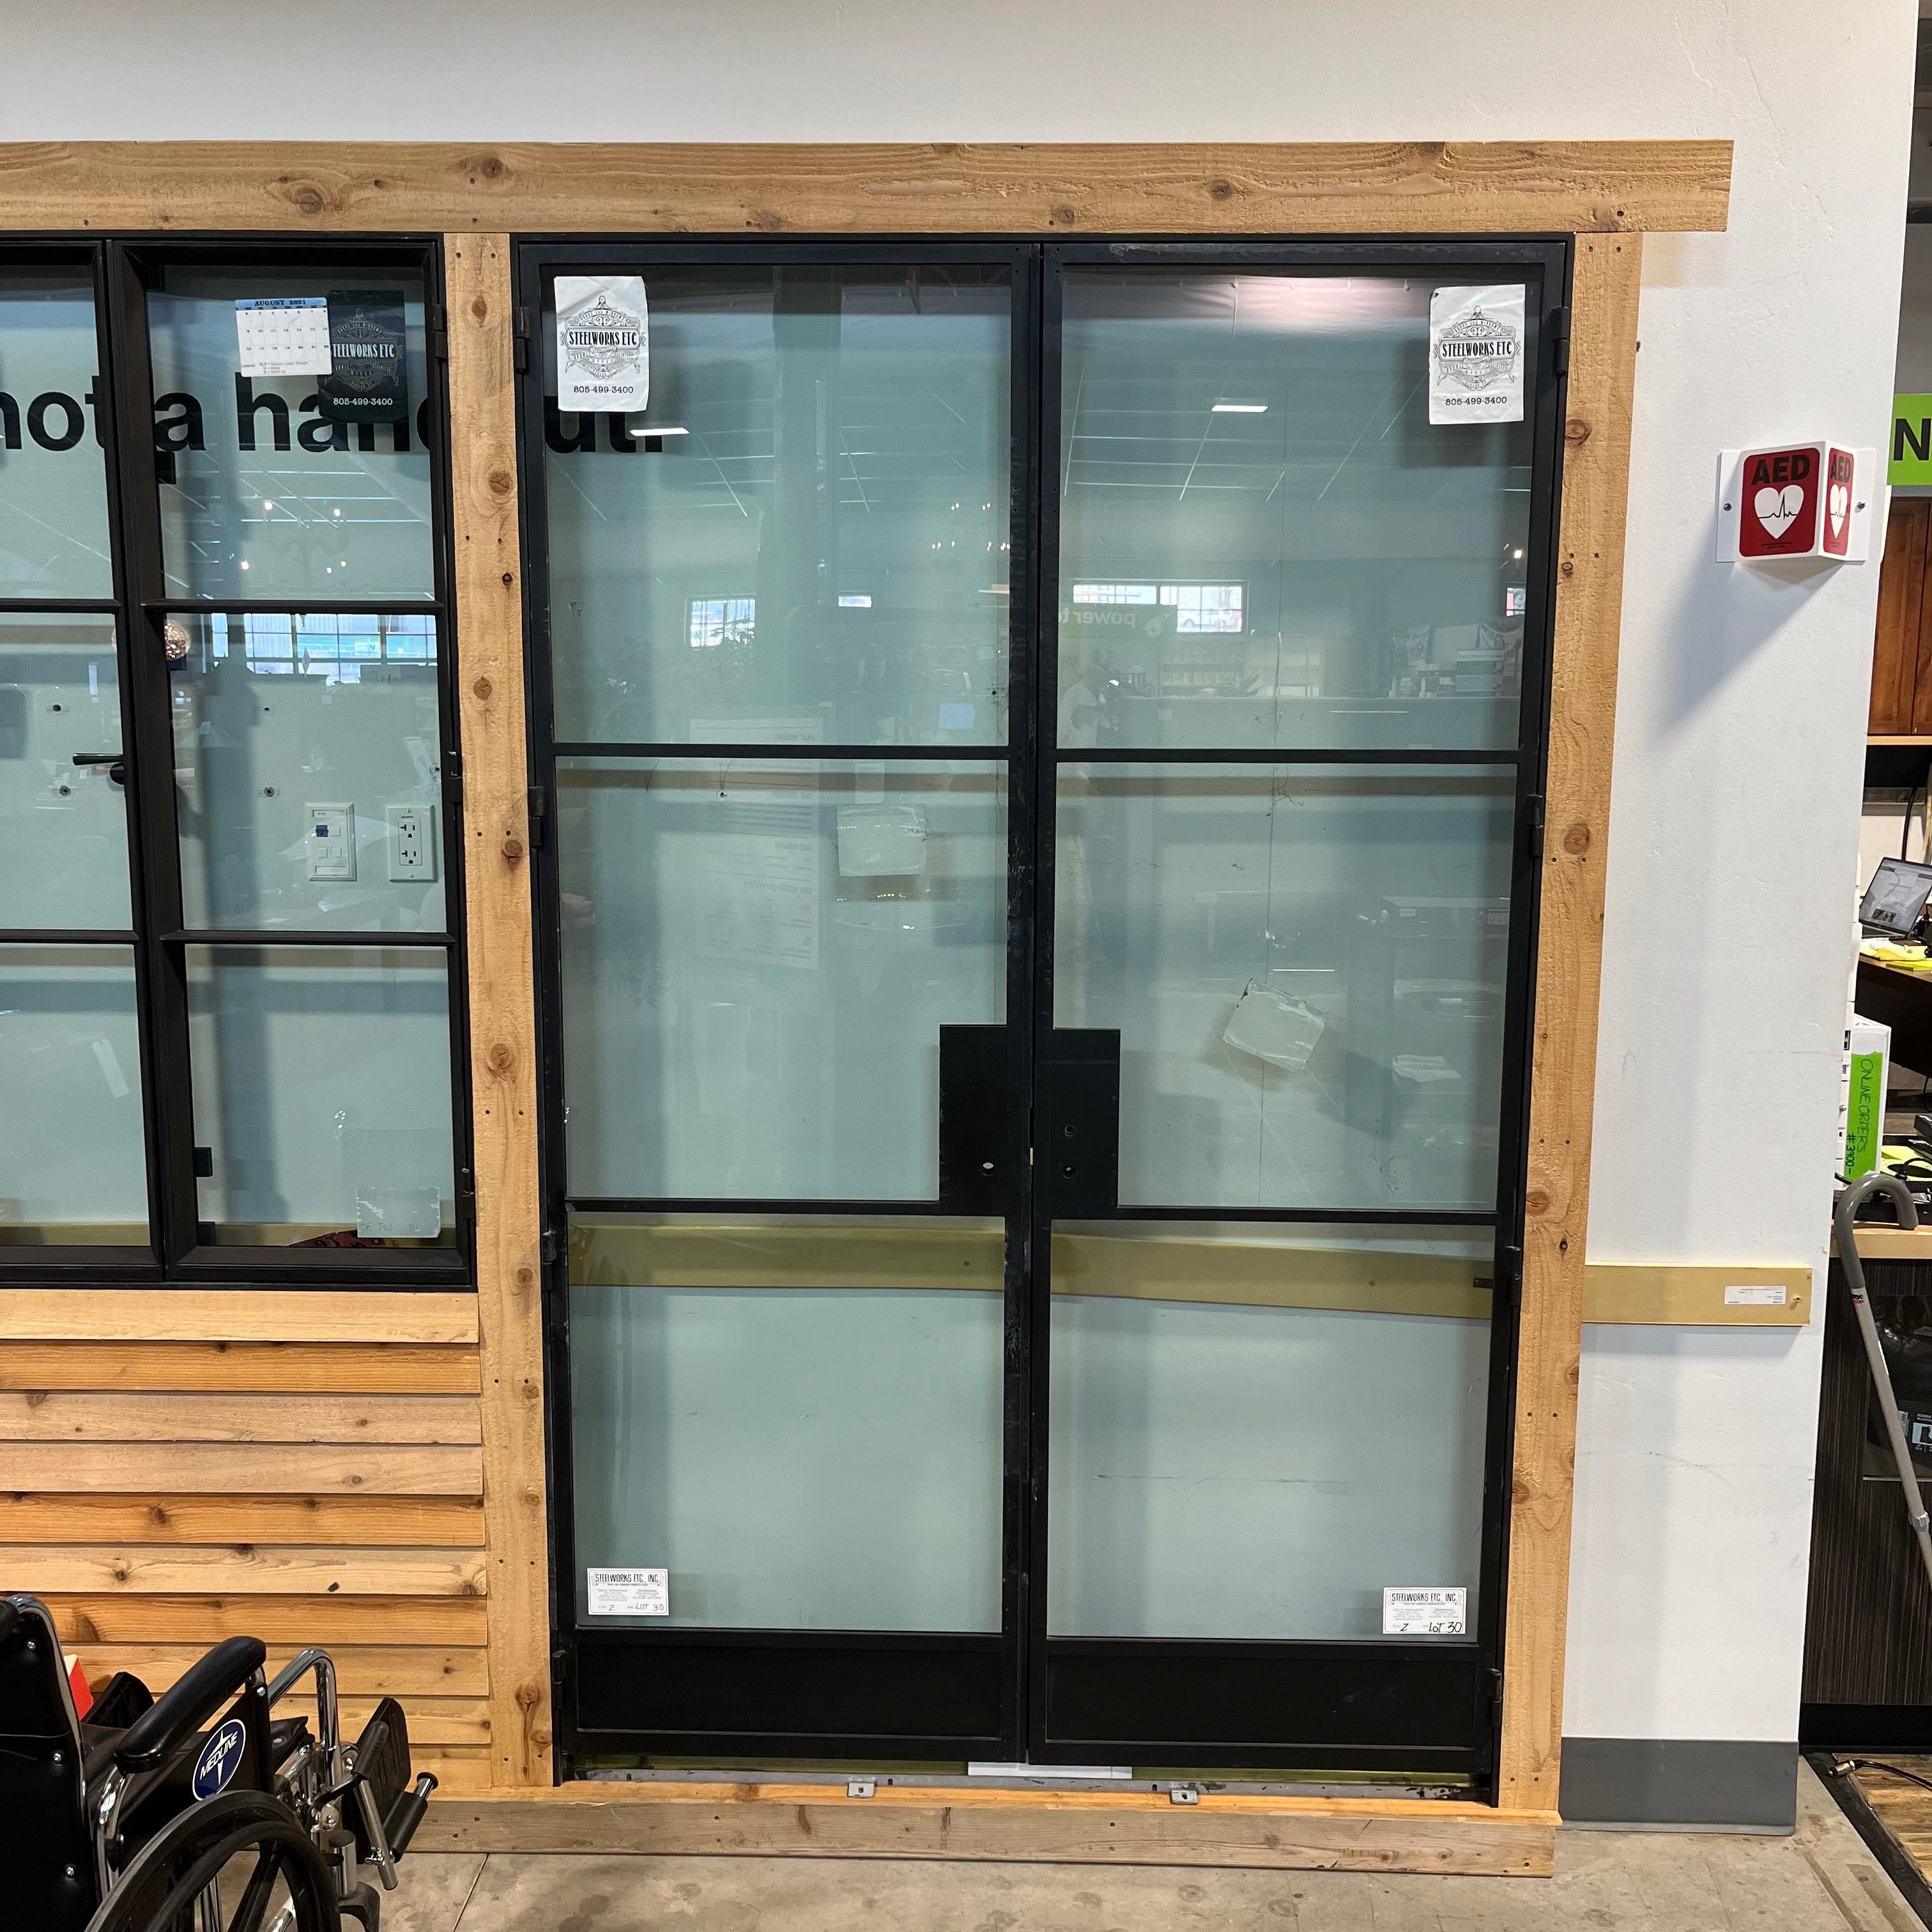 56.75"x 88.25"x 1.5" Six 1/4" Solarban 60 Laminated Single Pane Glass Panels Black Metal with Jamb LH In-Swing Exterior French Doors